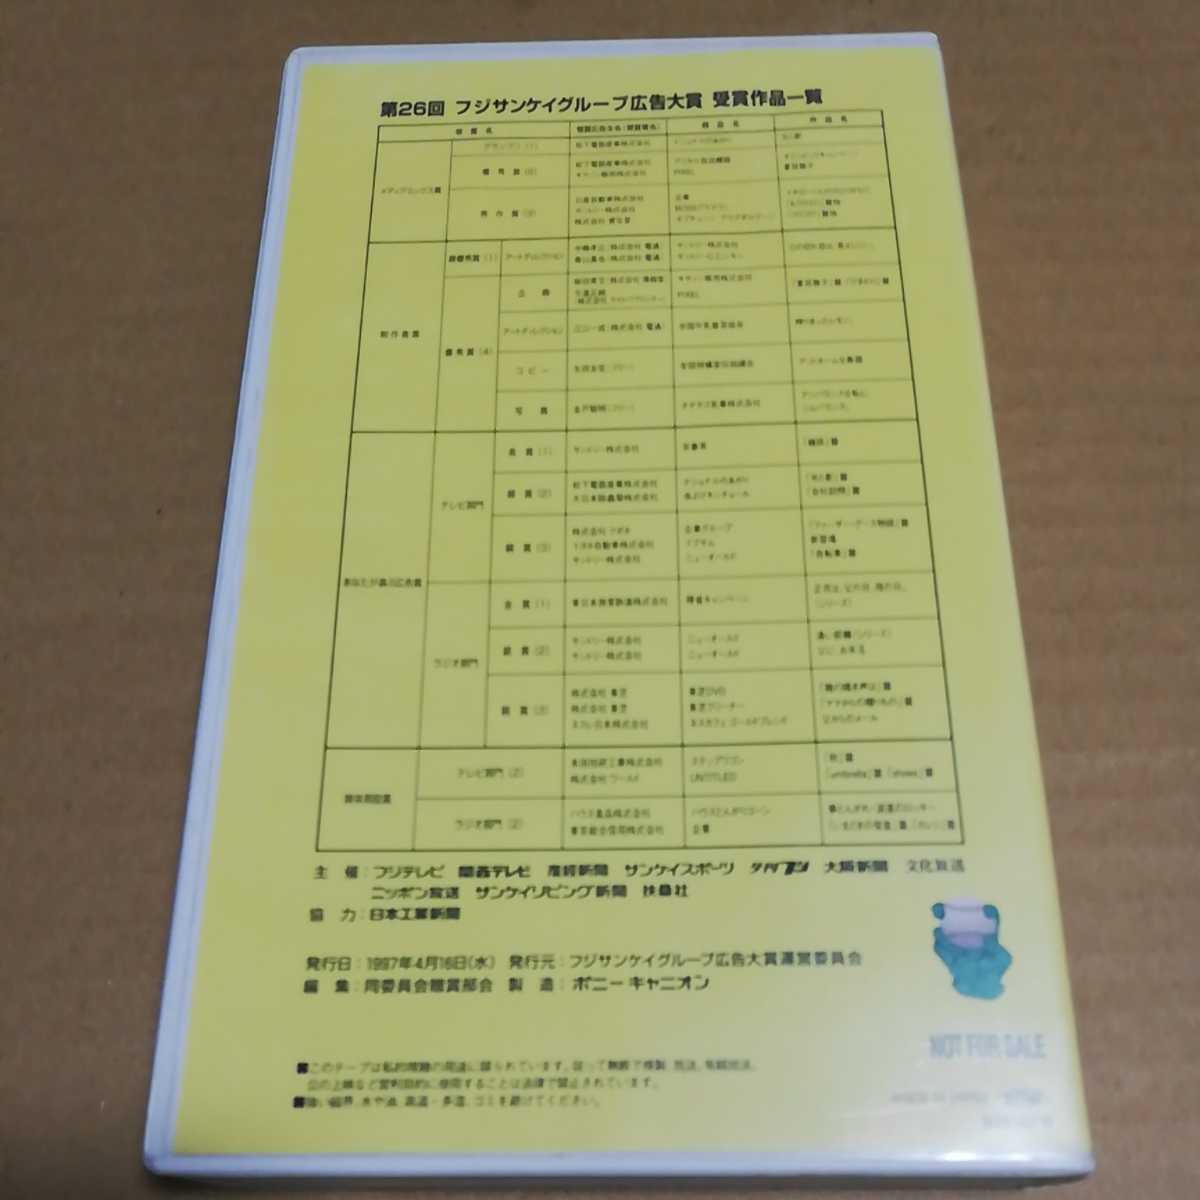 VHS no. 26 times Fuji sun Kei group advertisement large . winning work compilation * TV radio CM commercial * soft case none if cat pohs shipping possibility.